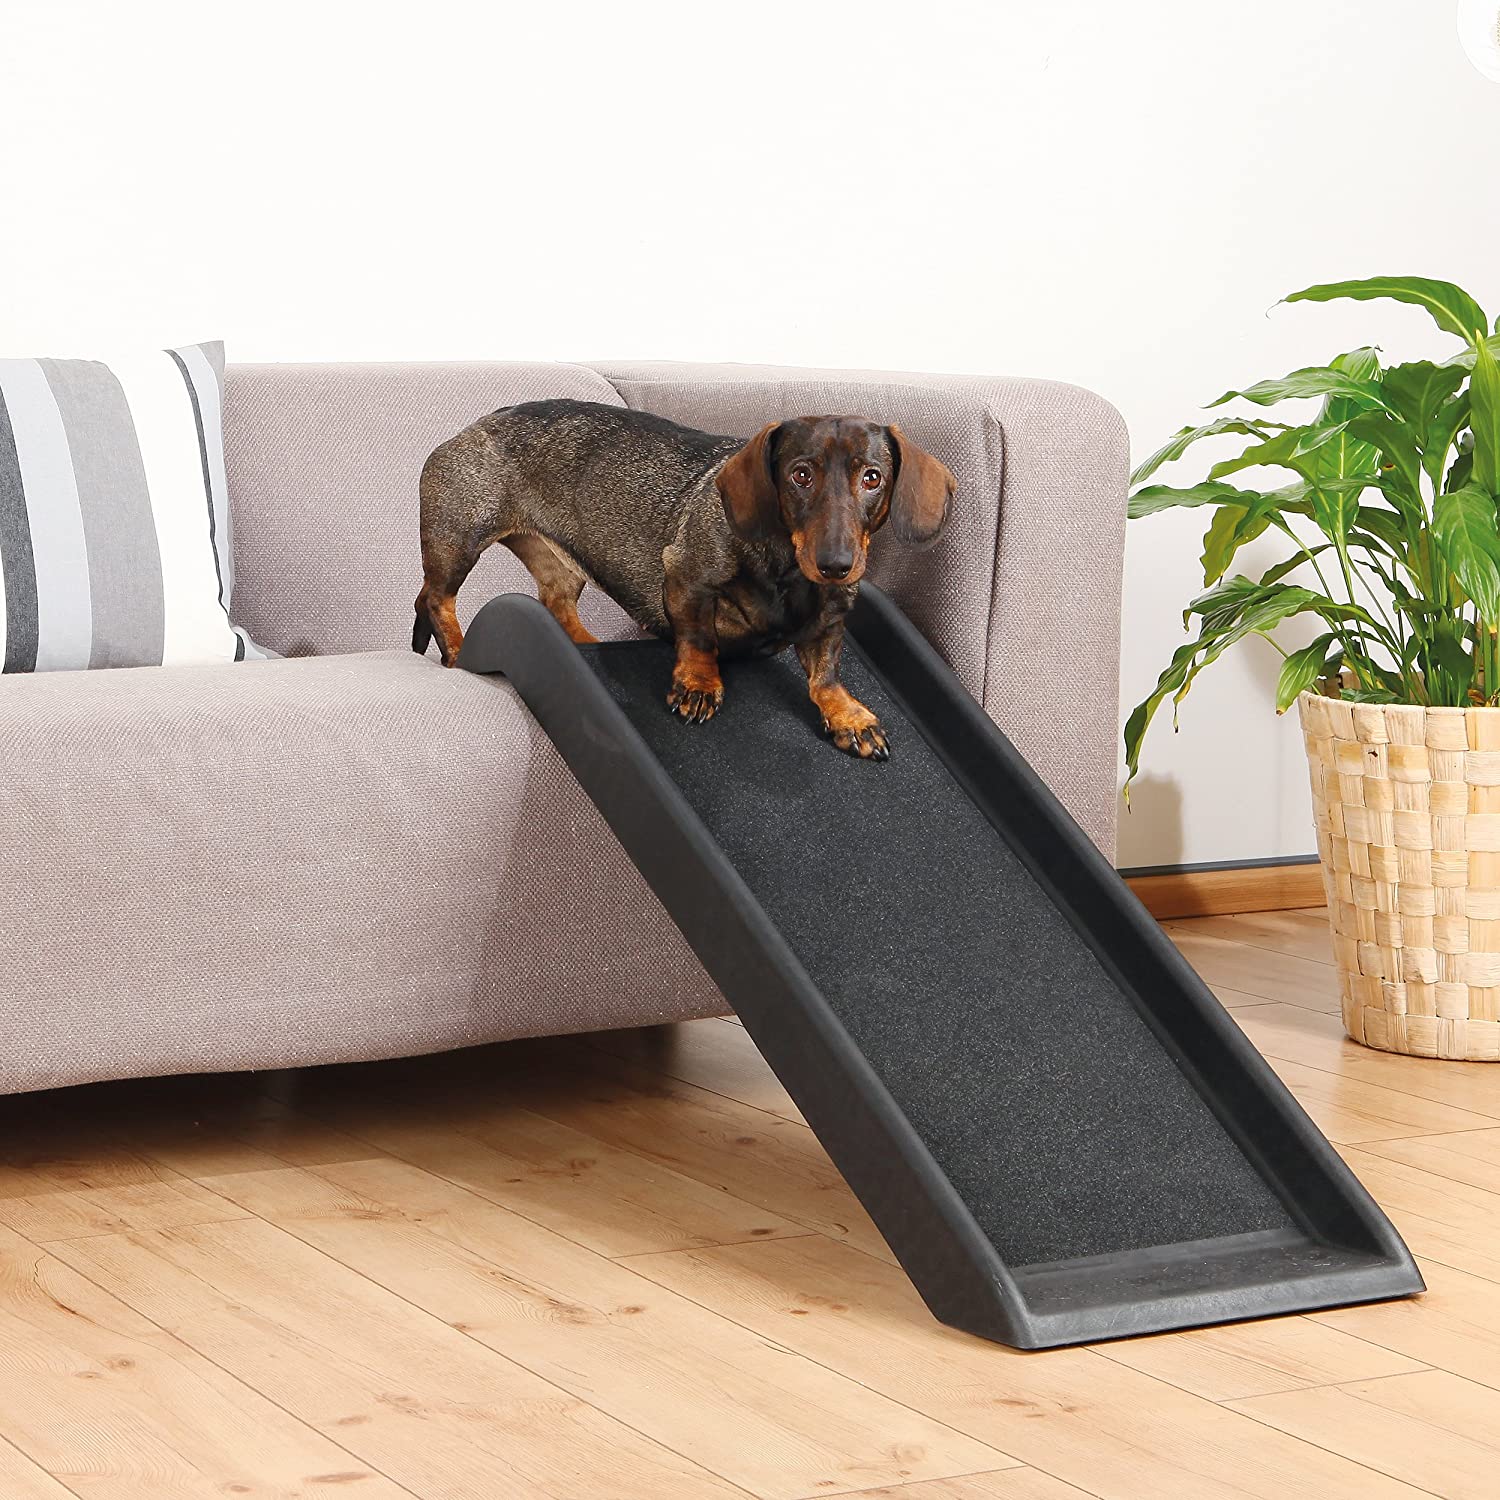 What-is-the-Best-Dog-Ramp-for-Small-Dogs